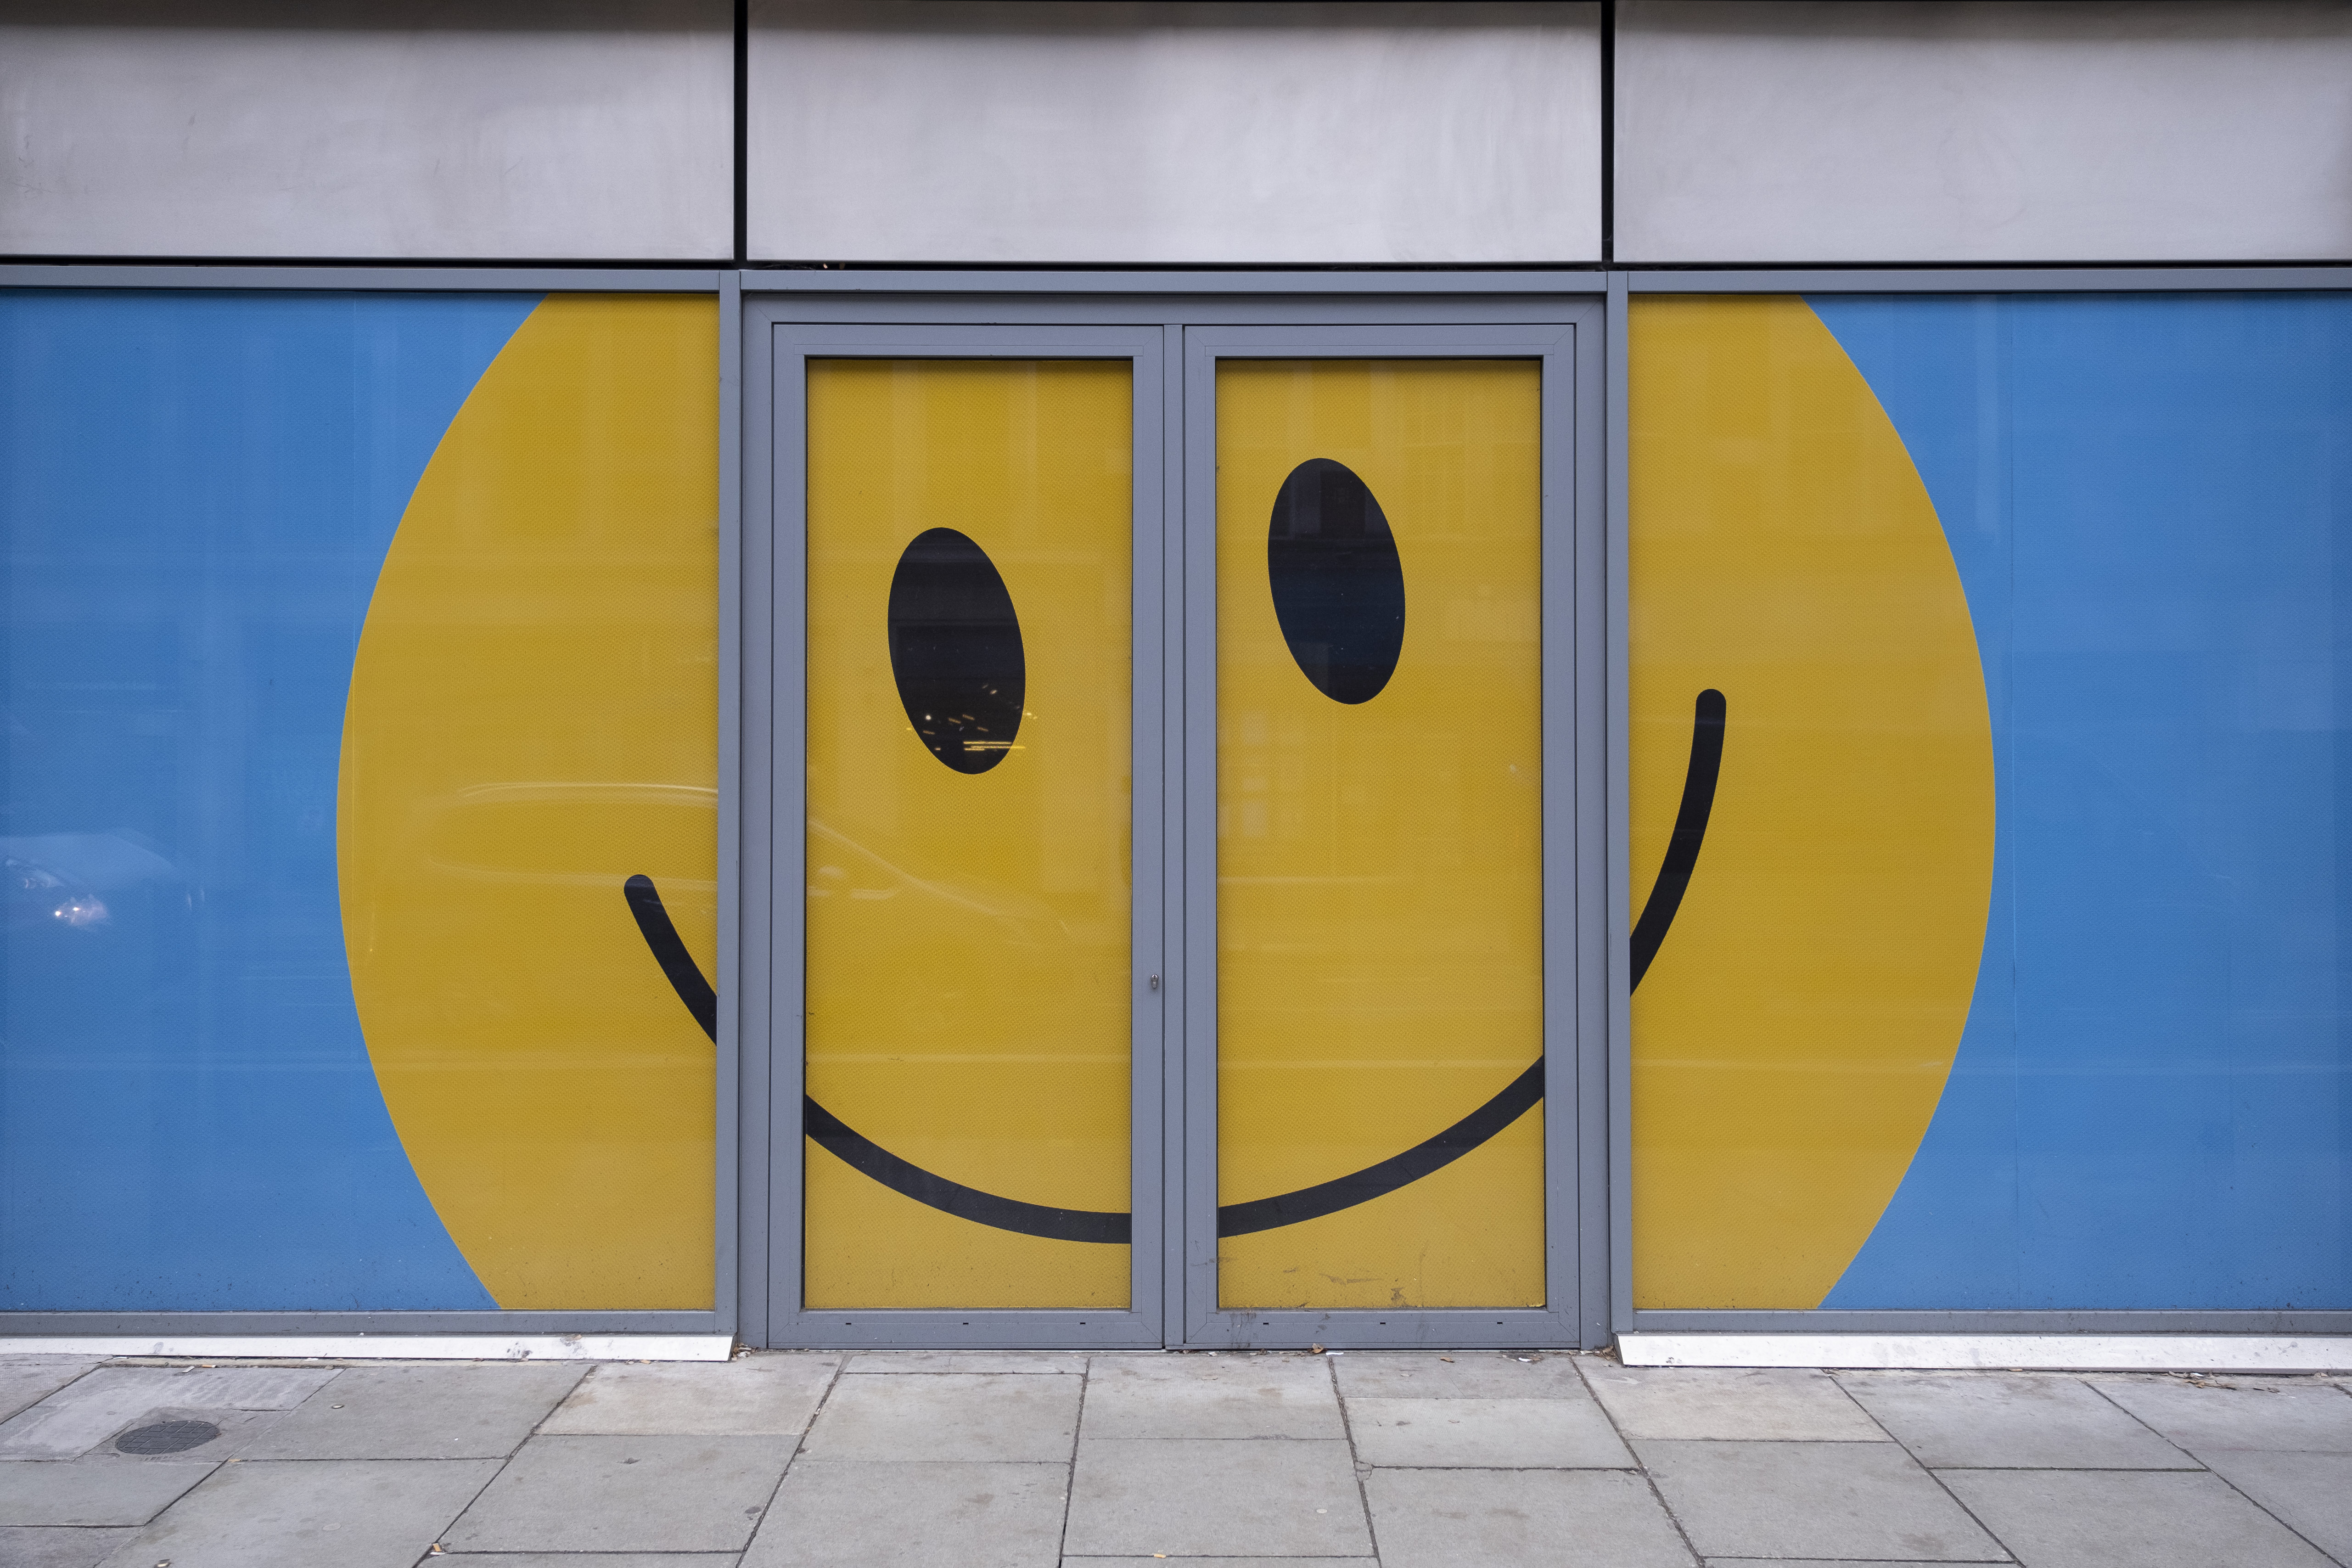 Smiley Faces In London